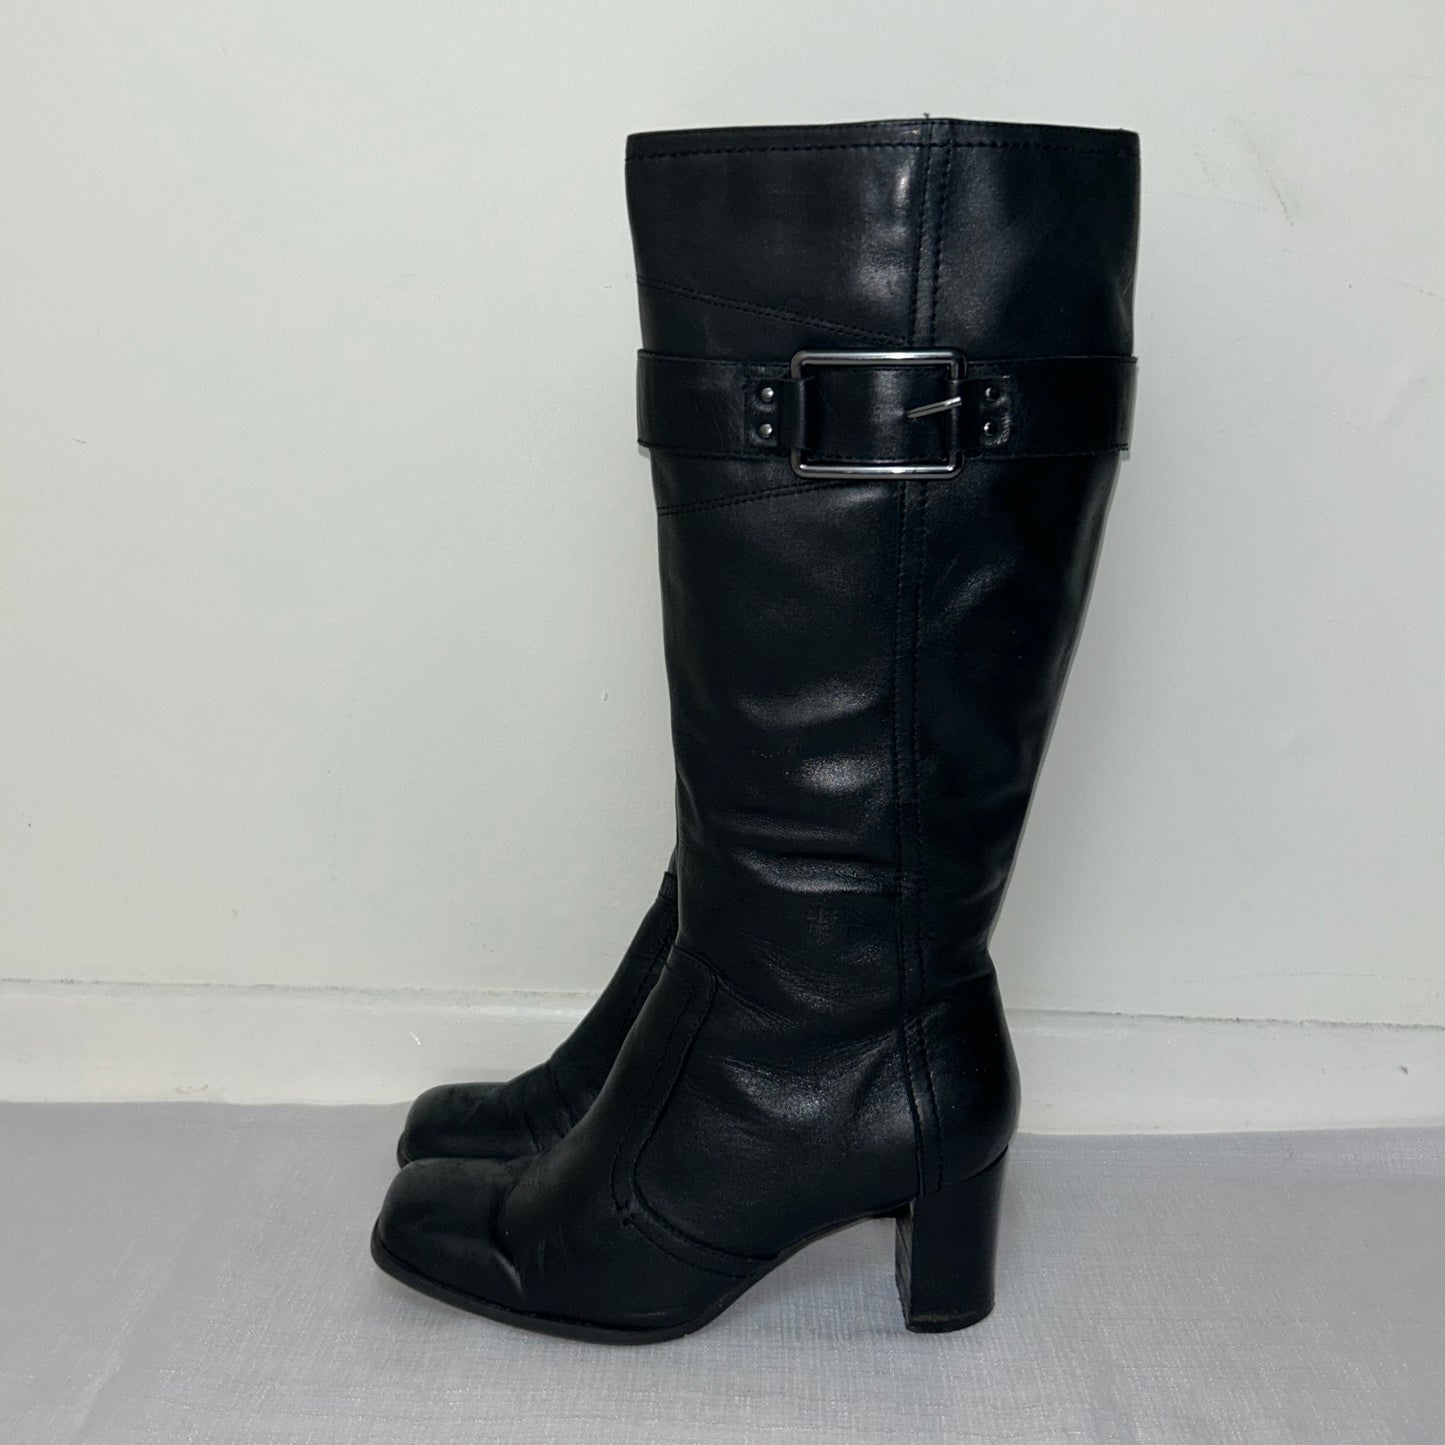 black knee high real leather boots shown on a white background